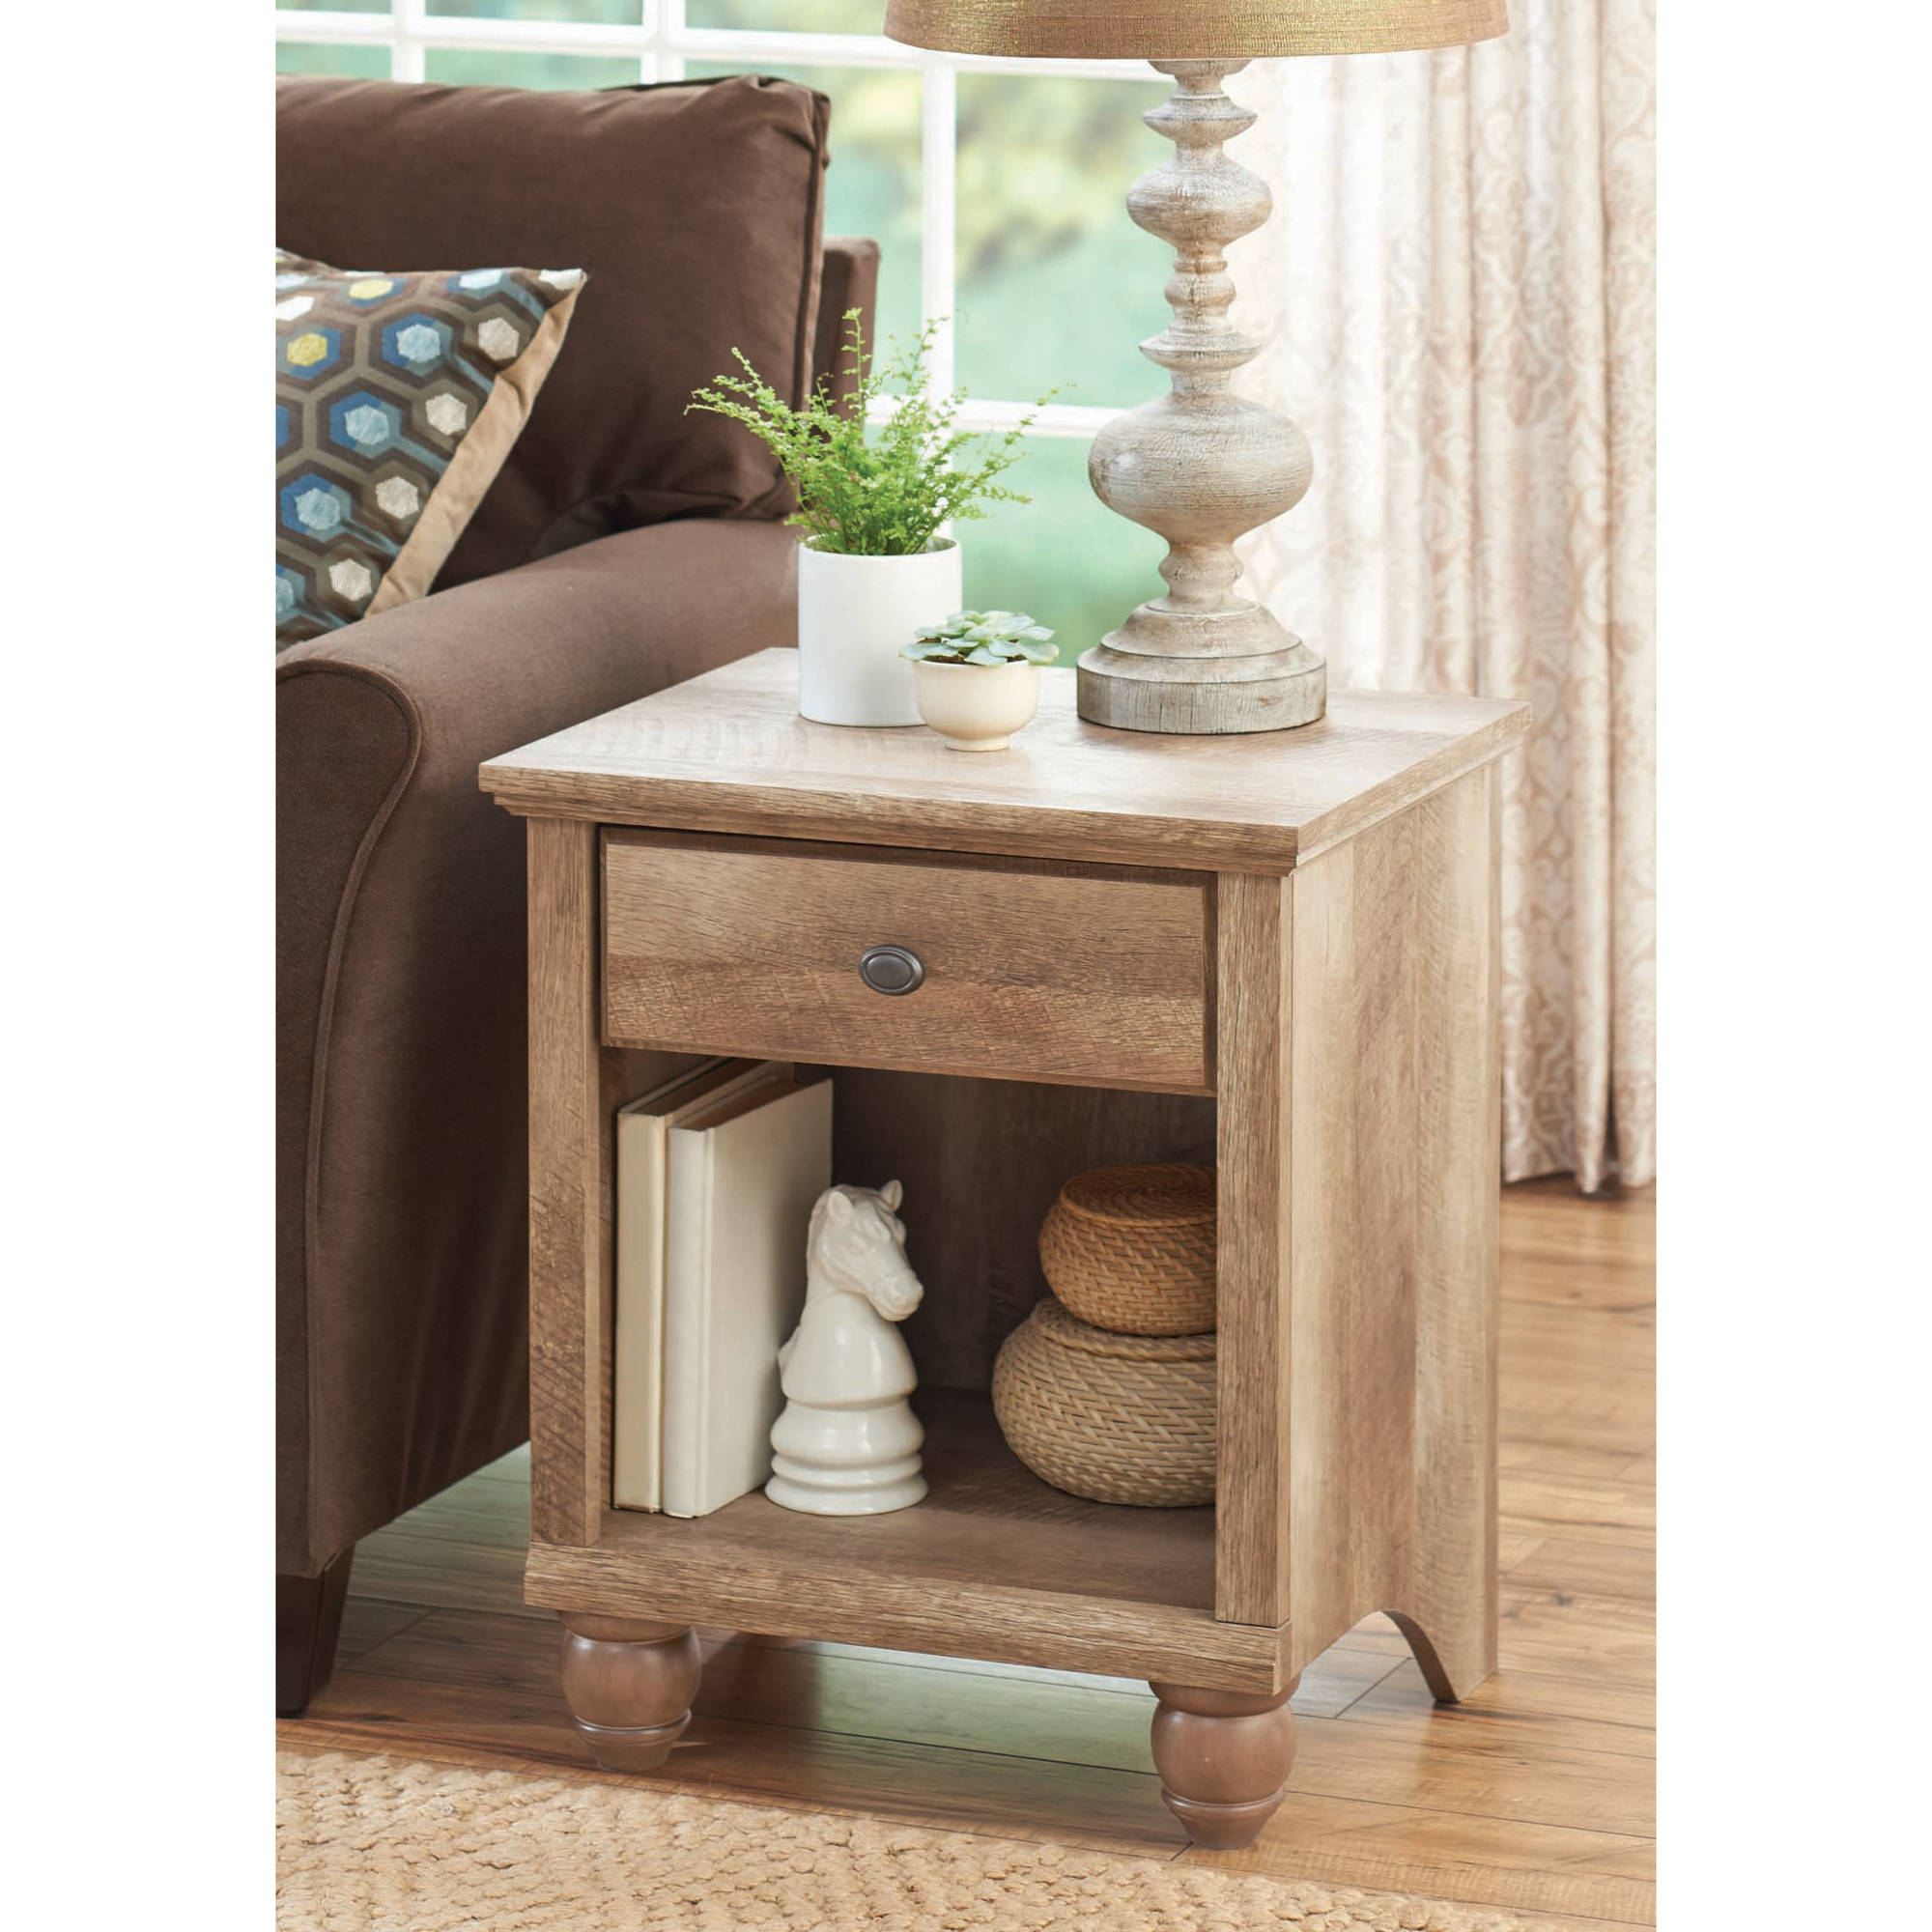 better homes gardens crossmill accent table weathered finish hadley with drawer brass hairpin legs cordless touch lamps small modern lamp farmhouse dining set argos coffee shabby